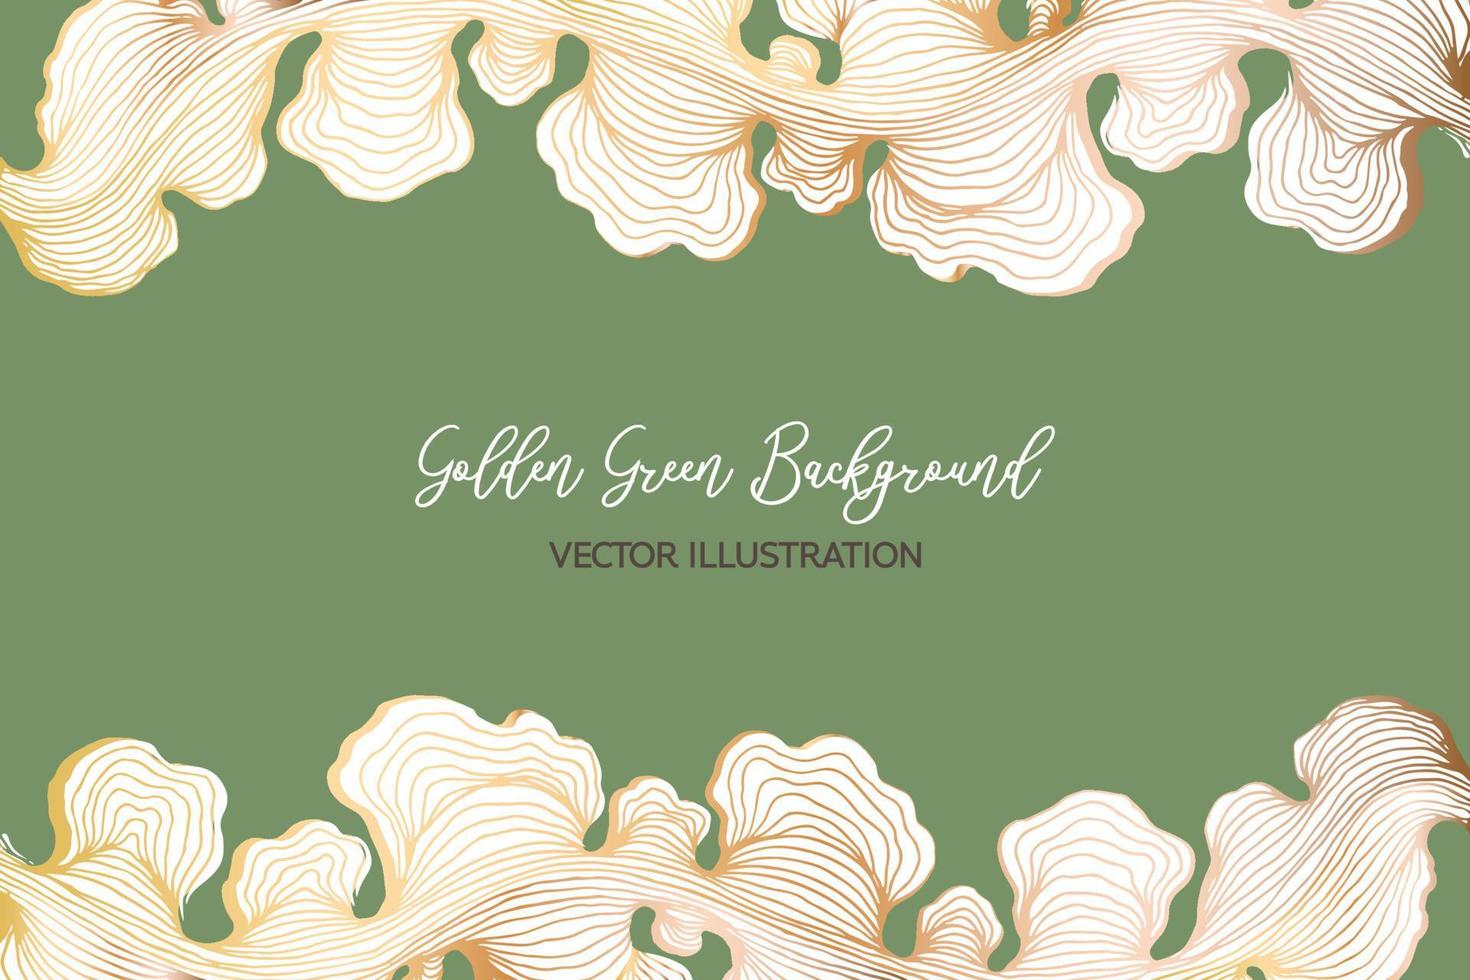 Abstract metallic golden green luxury background. Green wallpaper vector illustration with swirly organic lines.